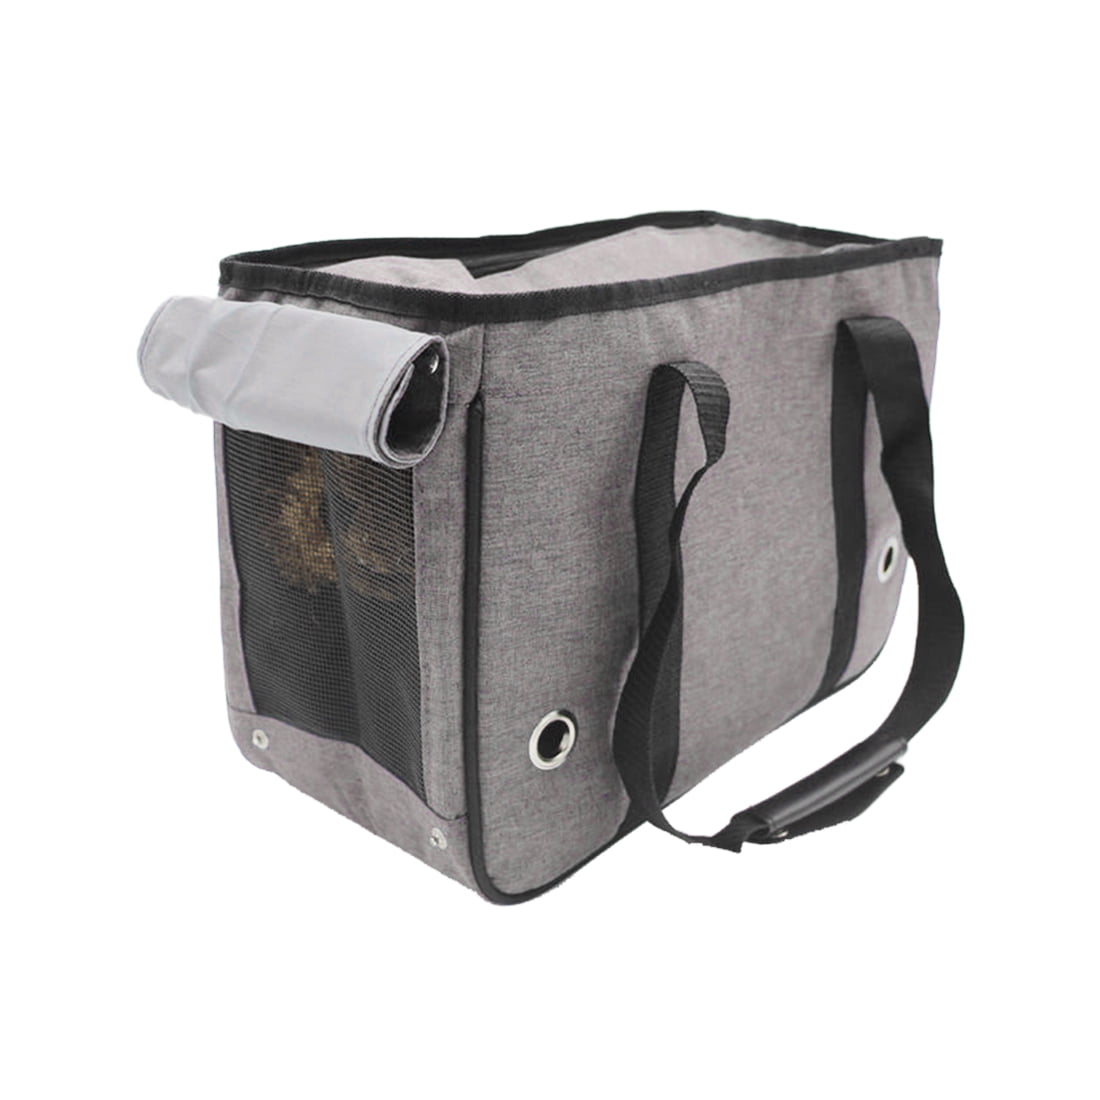 Airline Approved Cat Carrier for Small Dogs,Expandable Pet Carrier for  Medium Cats Under 15lb,Travel Dog Carriers for Small Dogs,Soft-Sided ?Cat  Carri for Sale in Litchfield Park, AZ - OfferUp